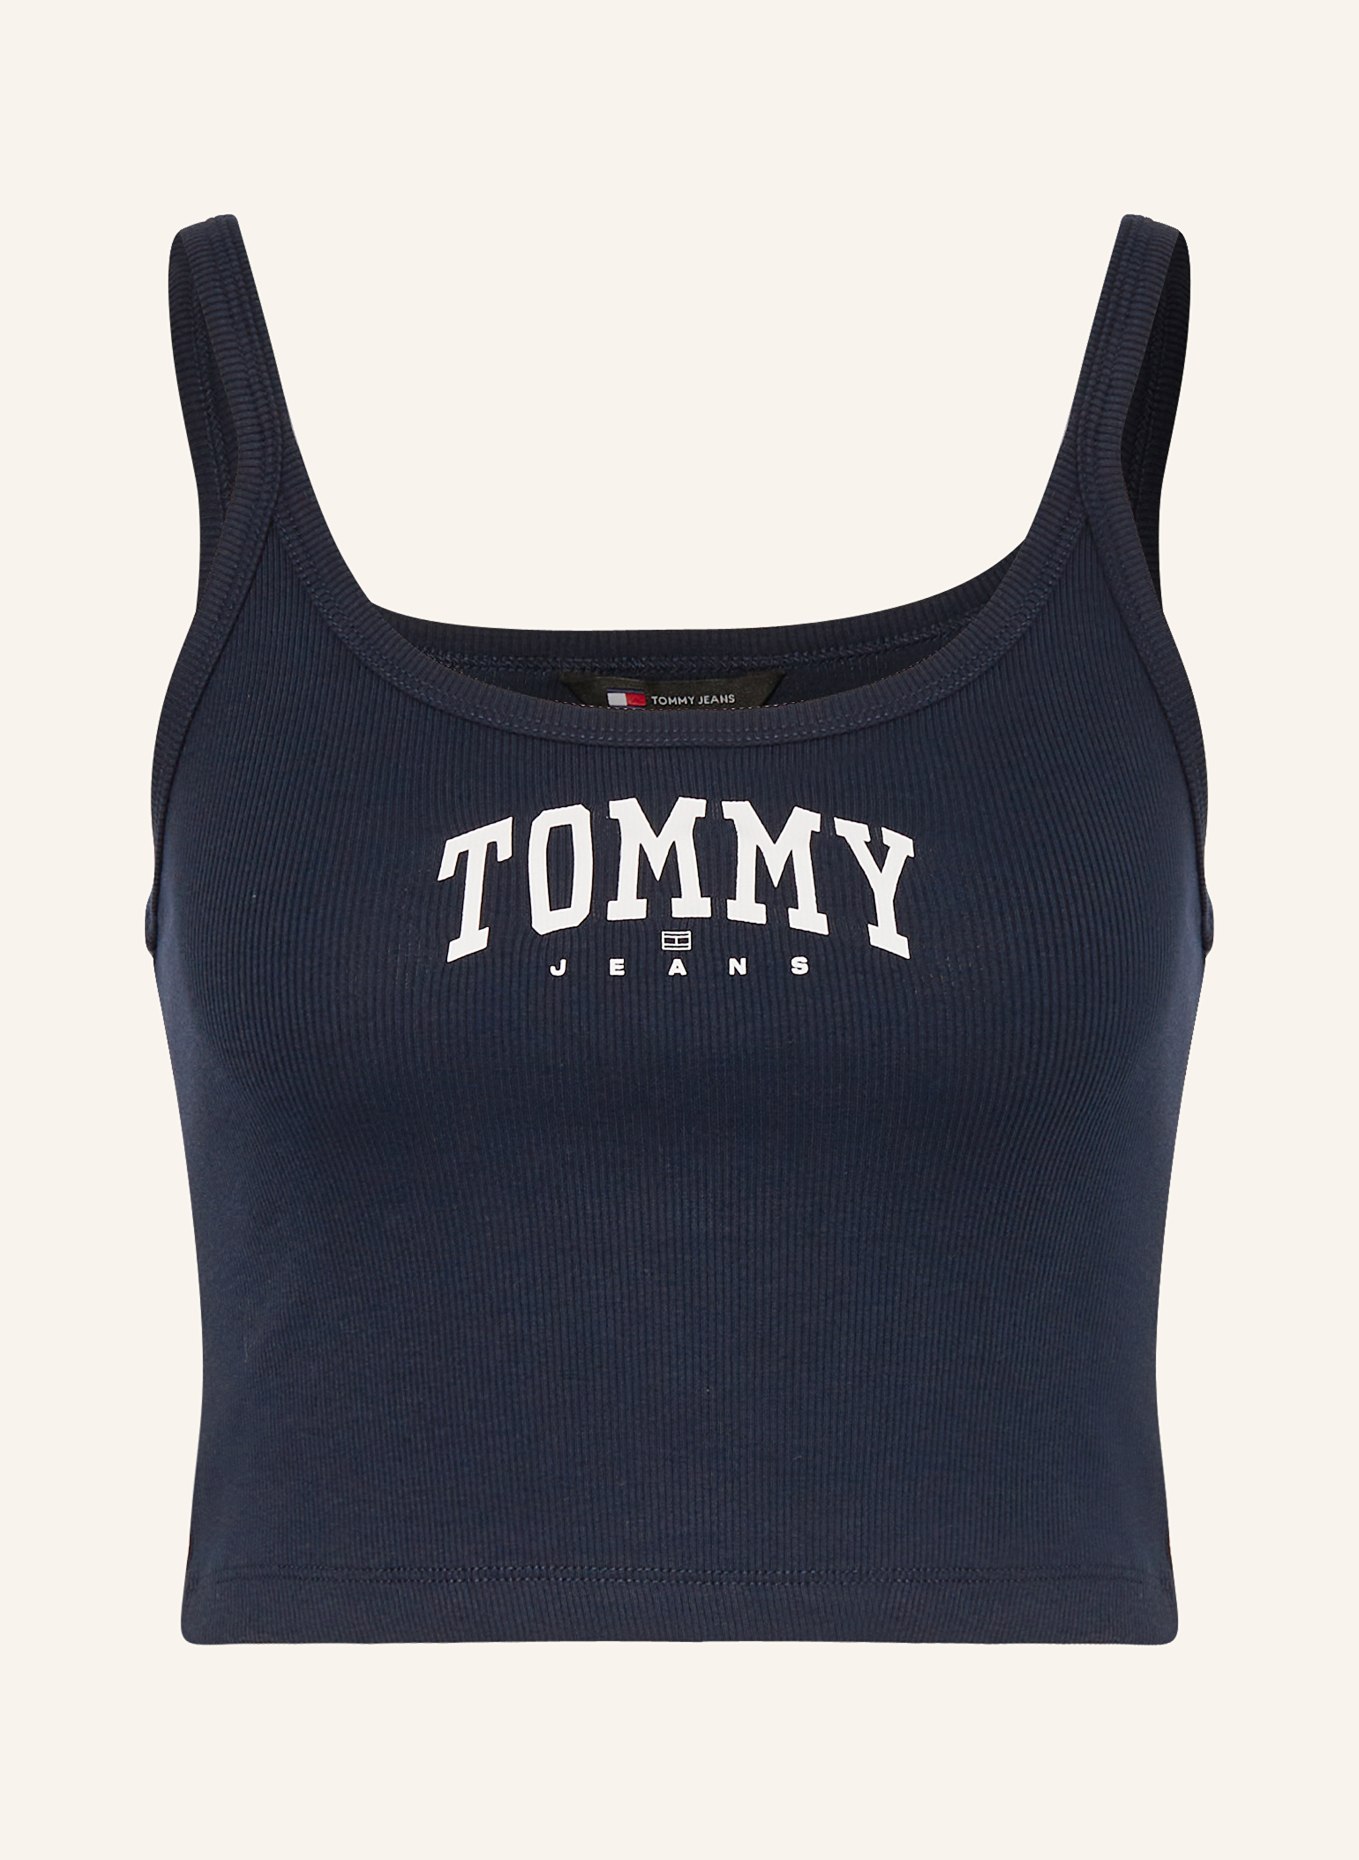 TOMMY JEANS Cropped-Top, Farbe: DUNKELBLAU (Bild 1)